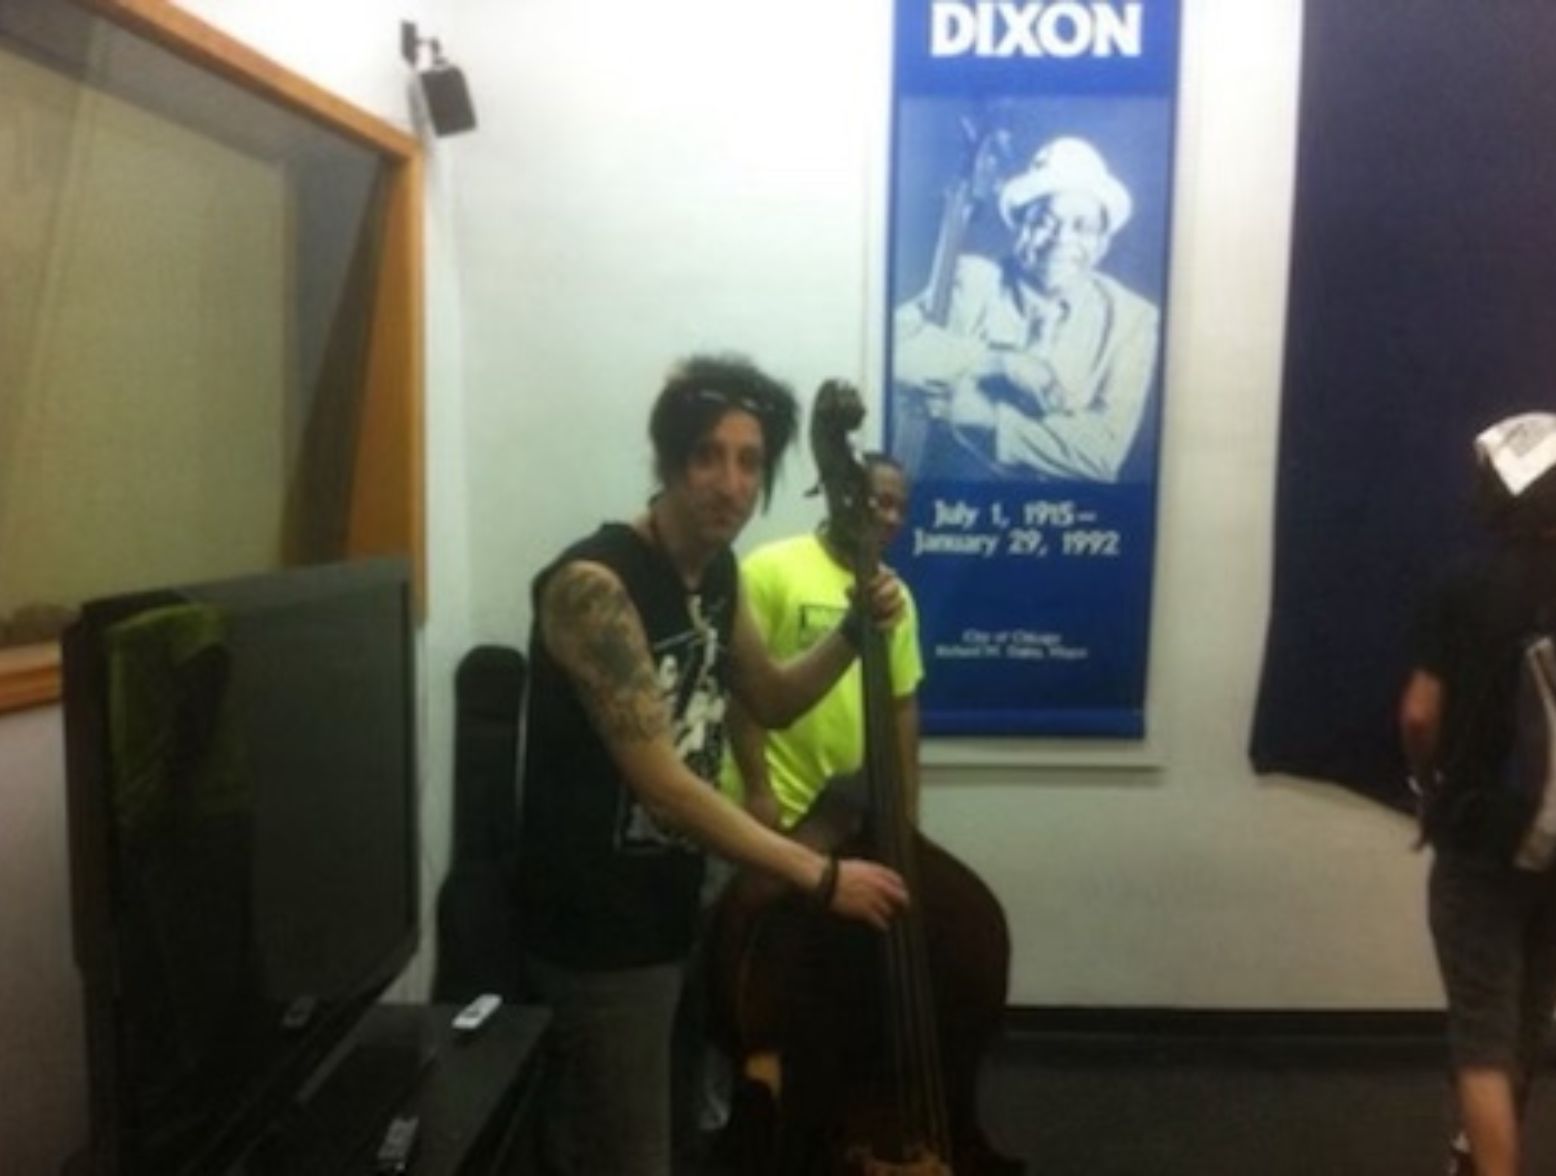 Jacky BamBam holding willie Dixons stand up bass